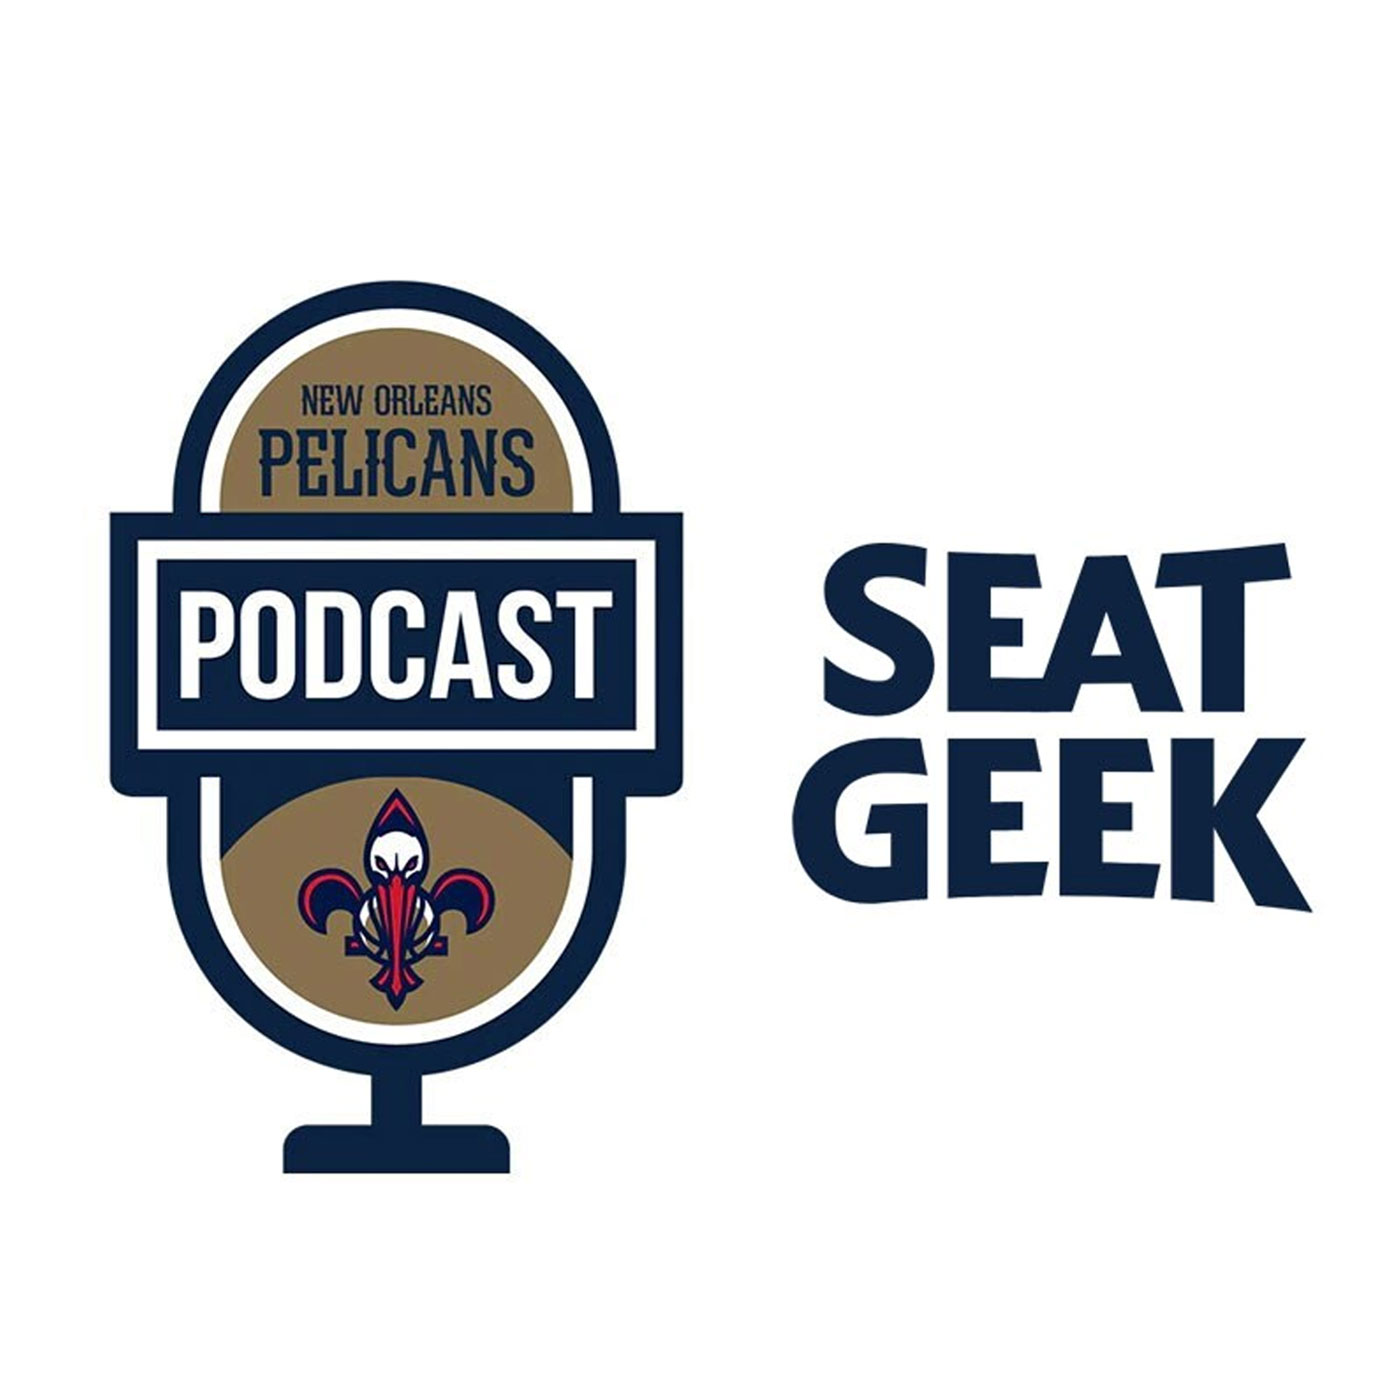 Mike Trudell on the New Orleans Pelicans podcast presented by SeatGeek - March 23, 2021